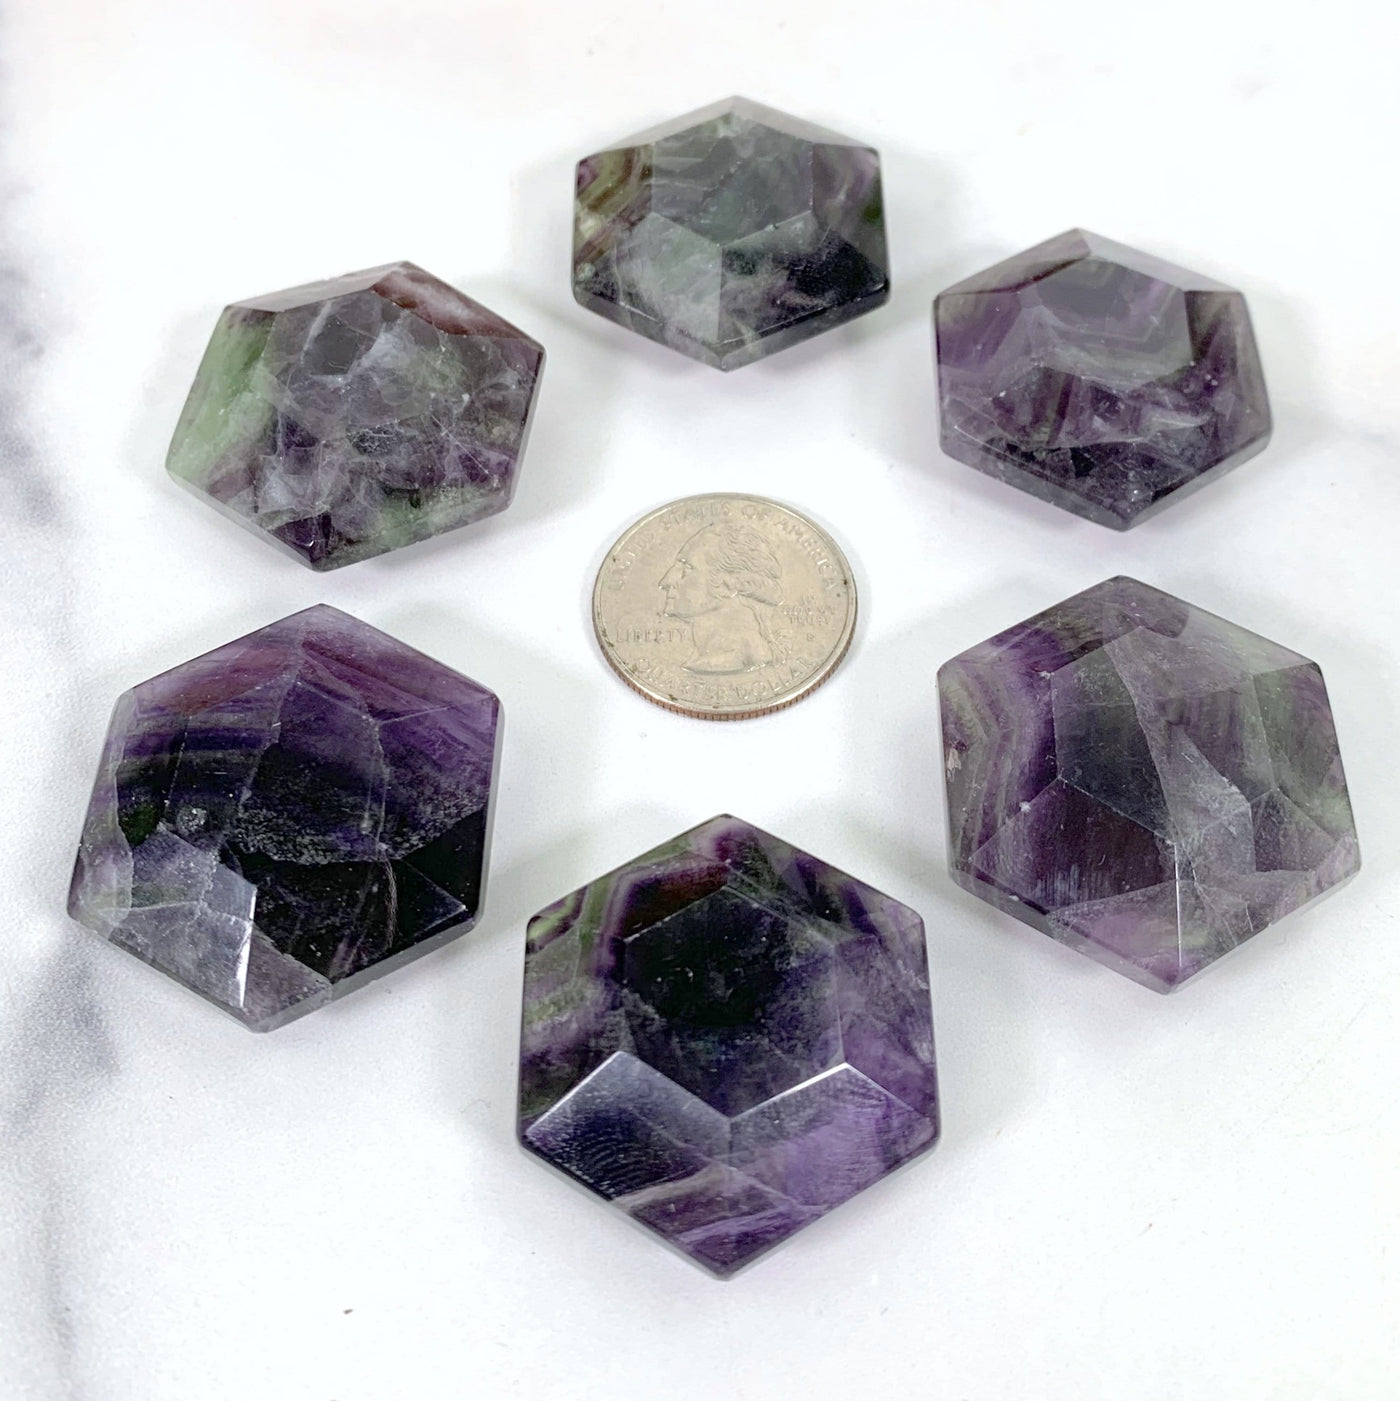 6 hexagonal fluorite polished stones surrounding a quarter for size reference on white background